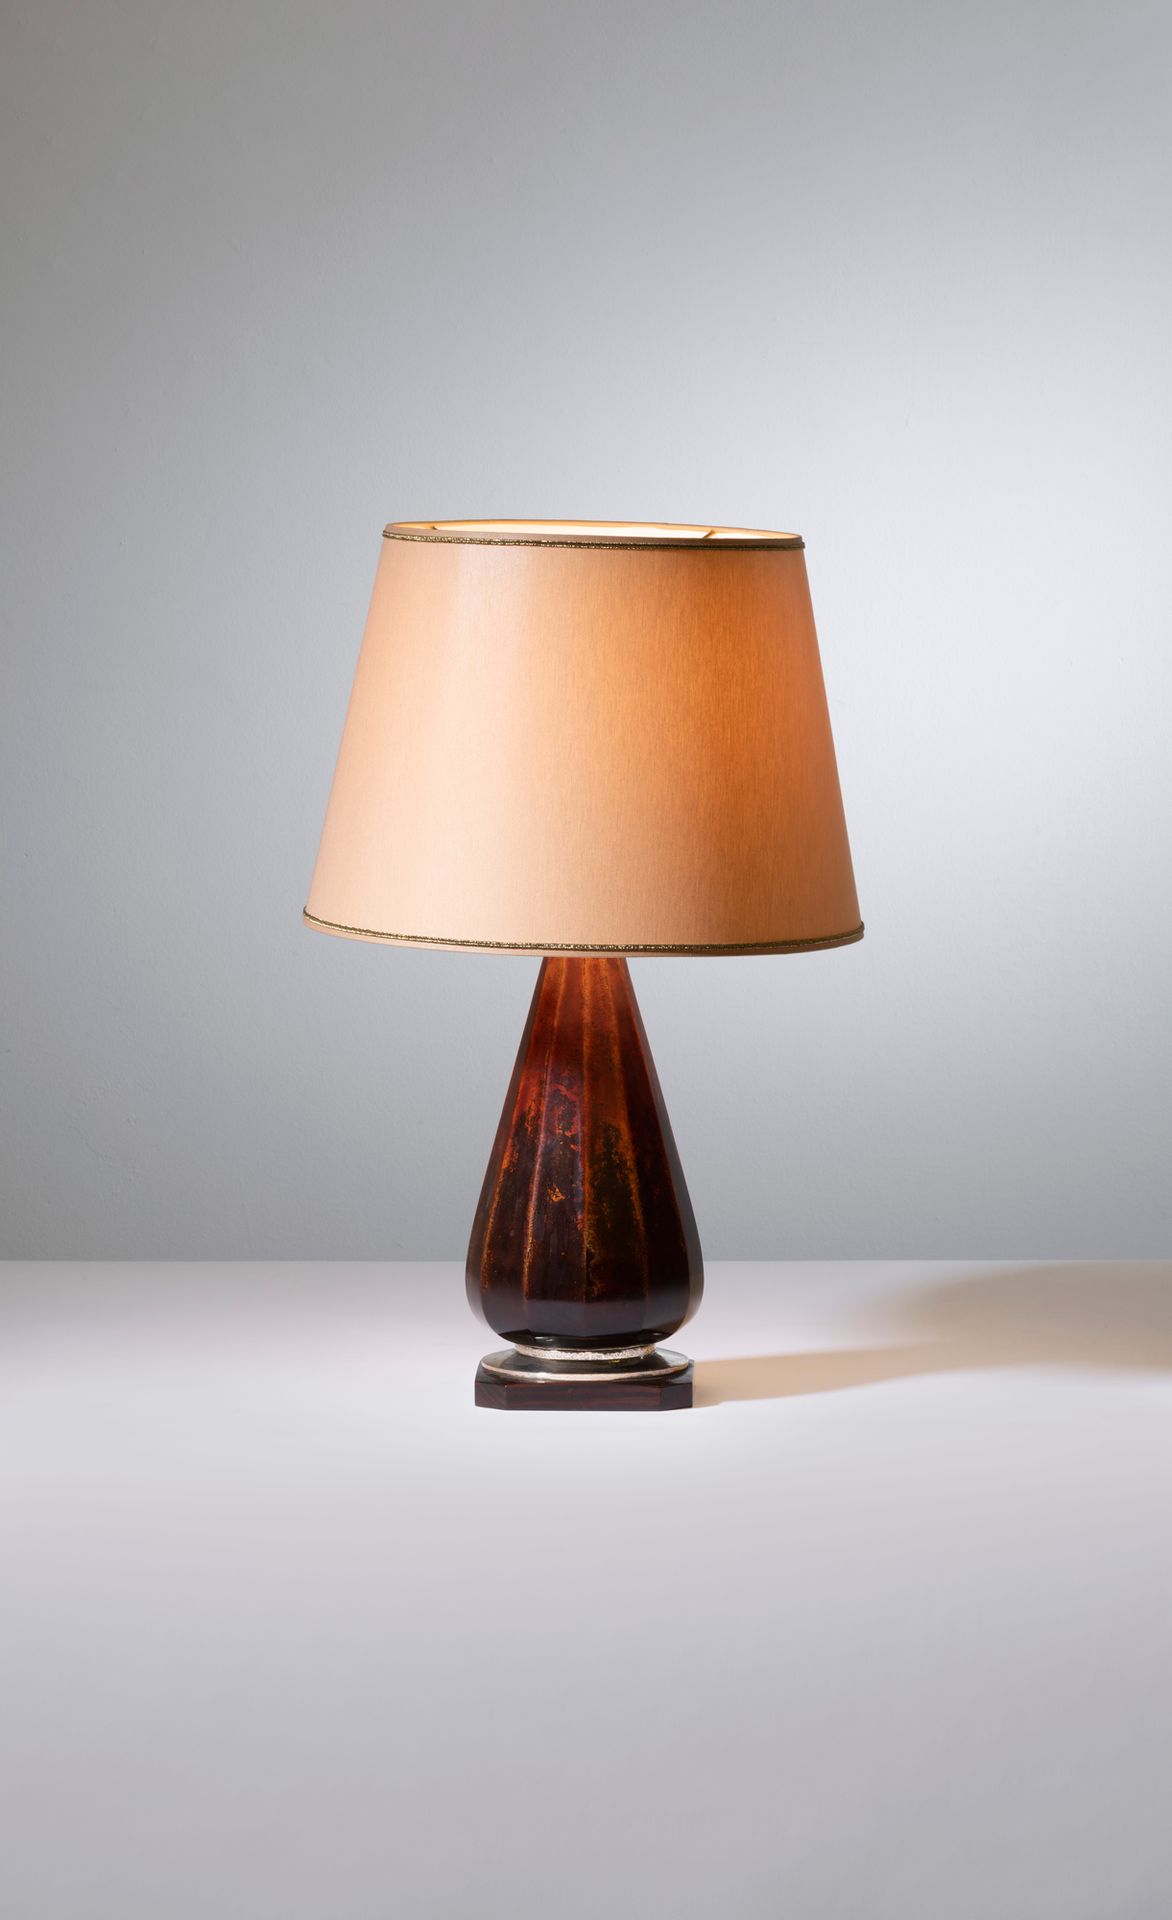 Marcel Wolfers (1886-1976) Table lamp
Rust brown lacquer on gold background.
Bas&hellip;